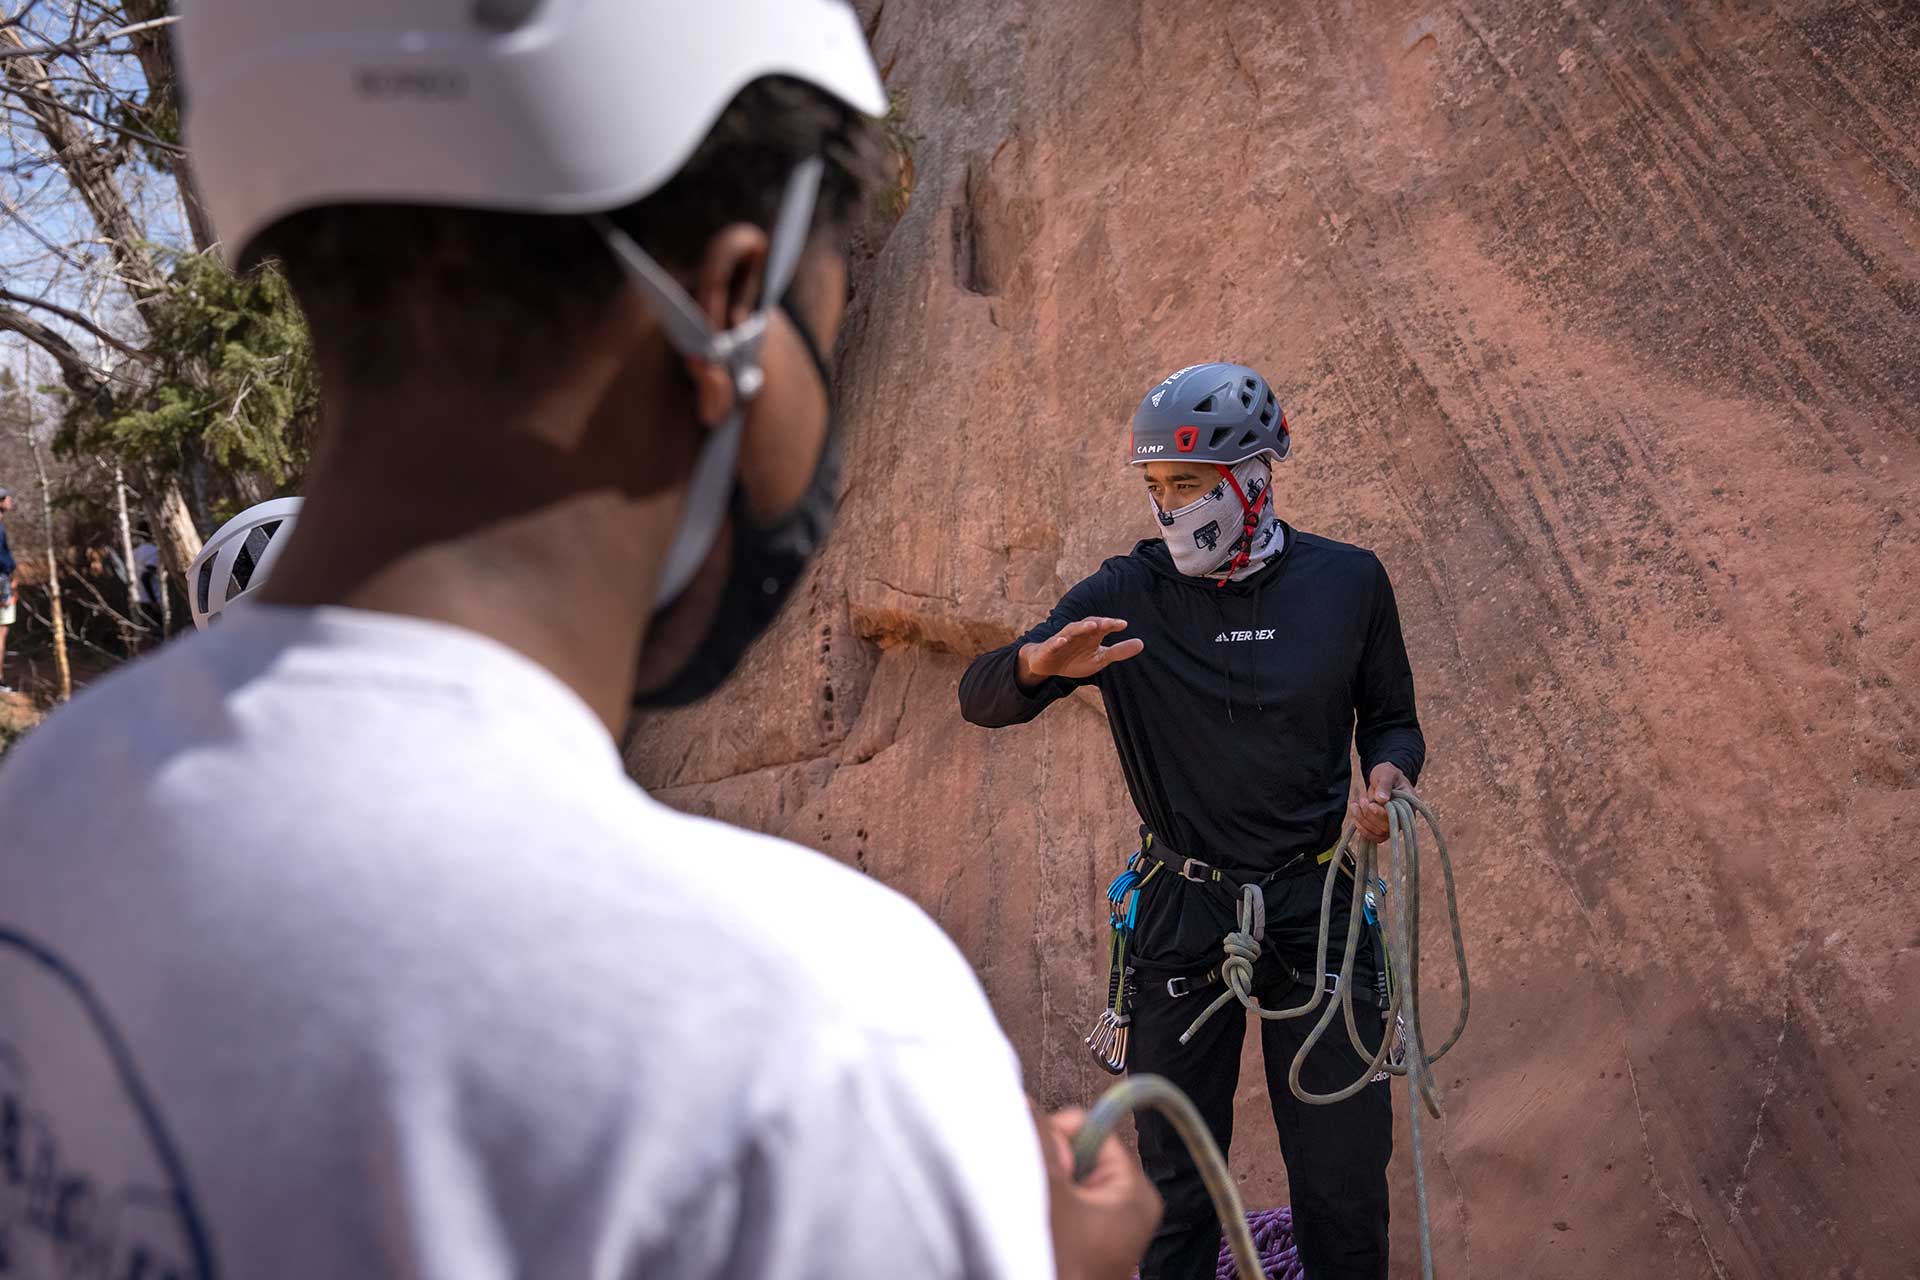 Devon Derby, a rock climbing instructor and marketing manager for Adidas Outdoors, runs through safety information with the group before beginning his climb. 